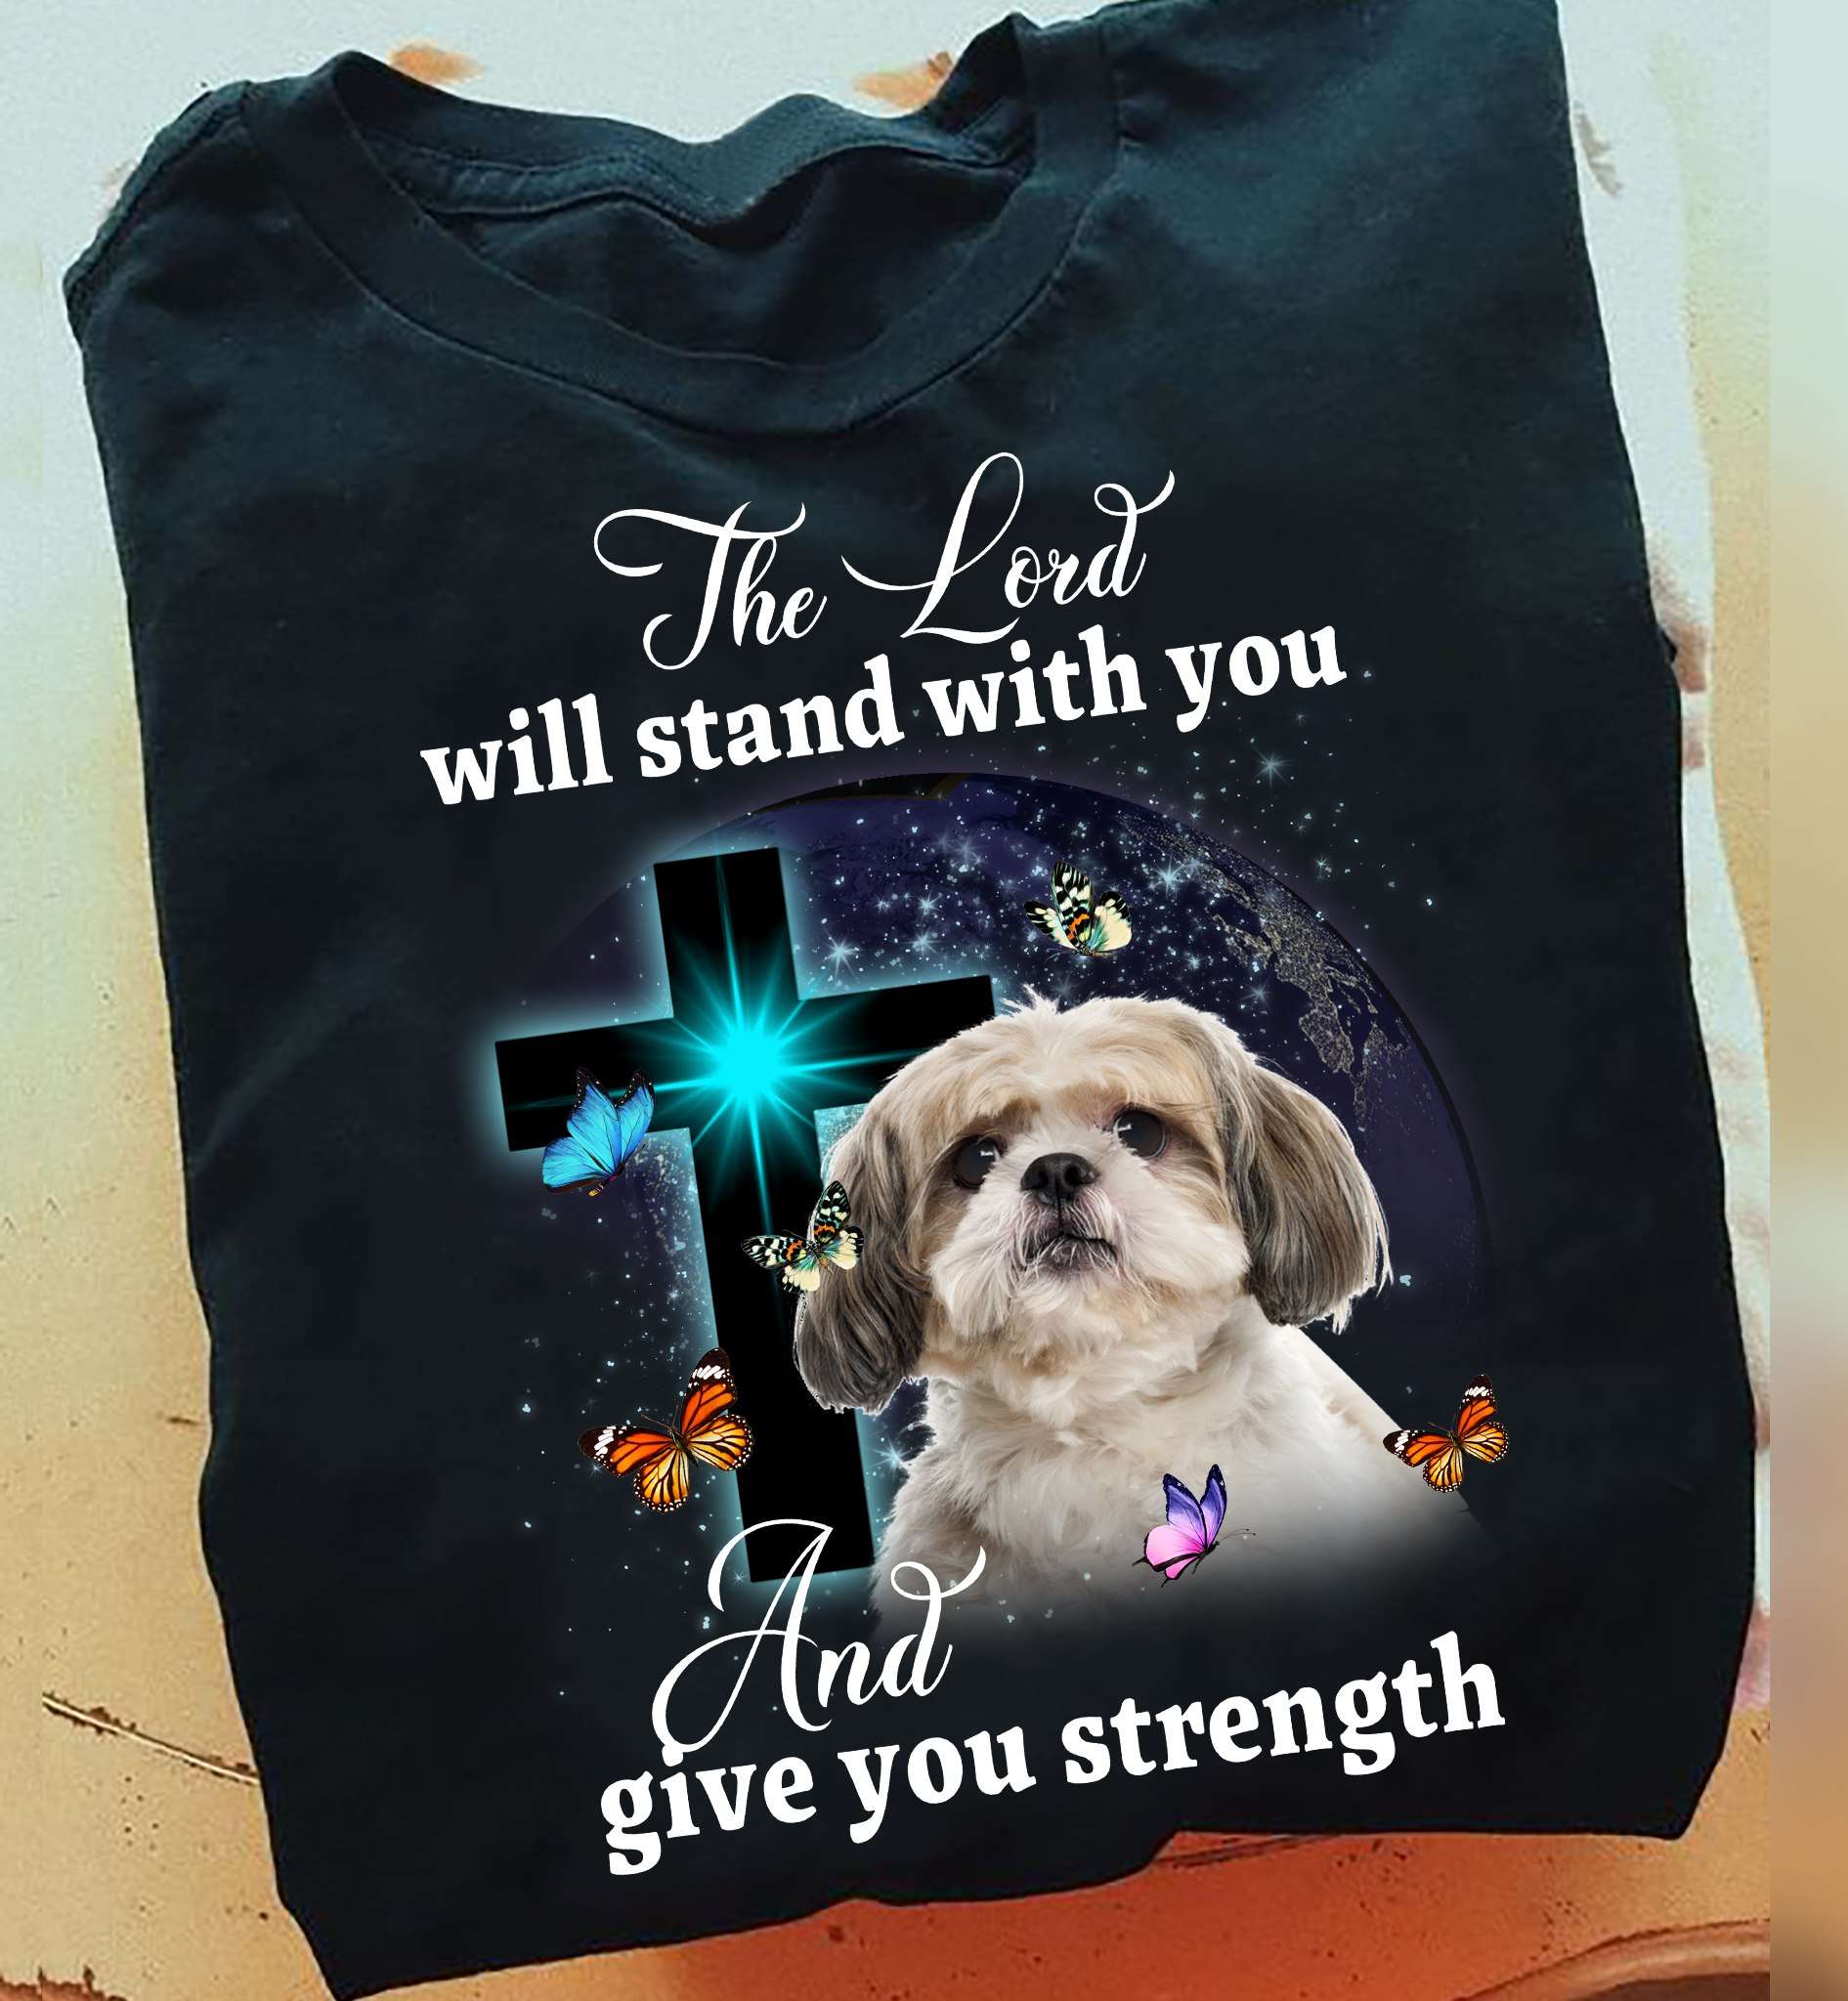 The lord will stand with you and give you strength - Shih Tzu dog